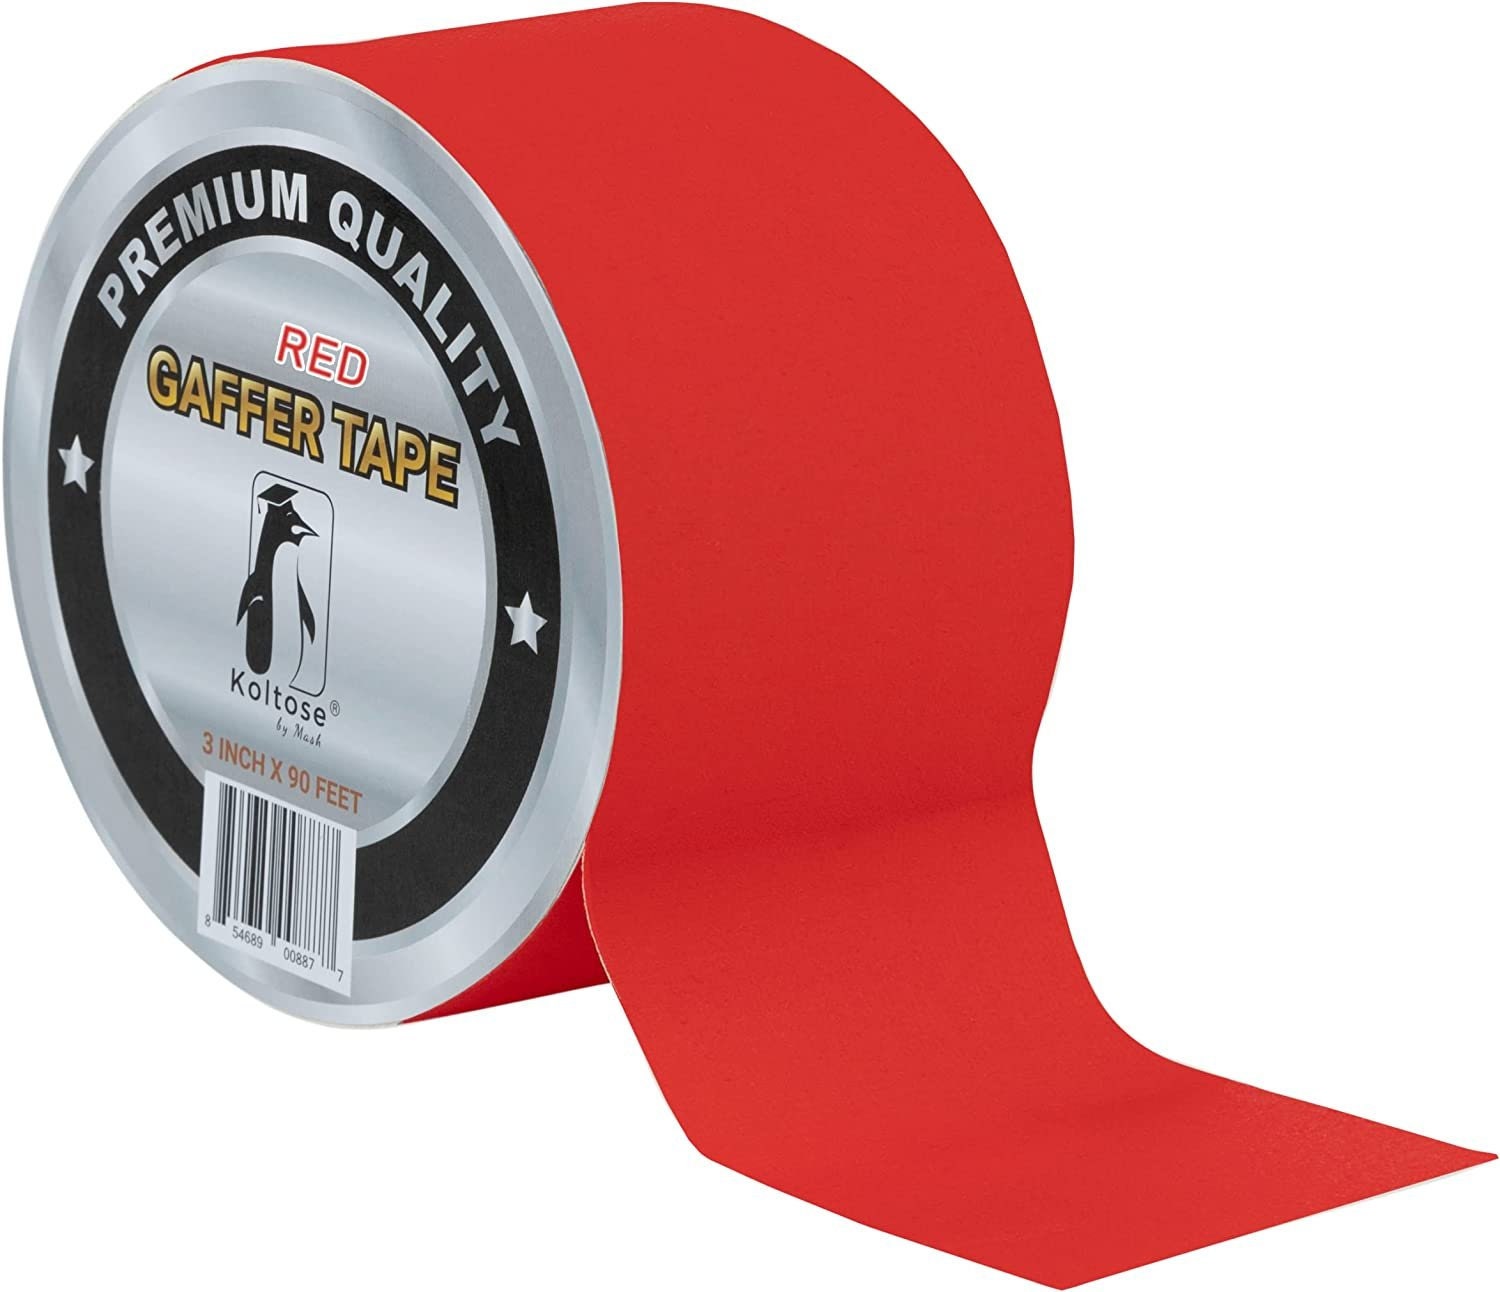 Double Sided Tape, Craft Tape, Adhesive Backed Double Sided Tape